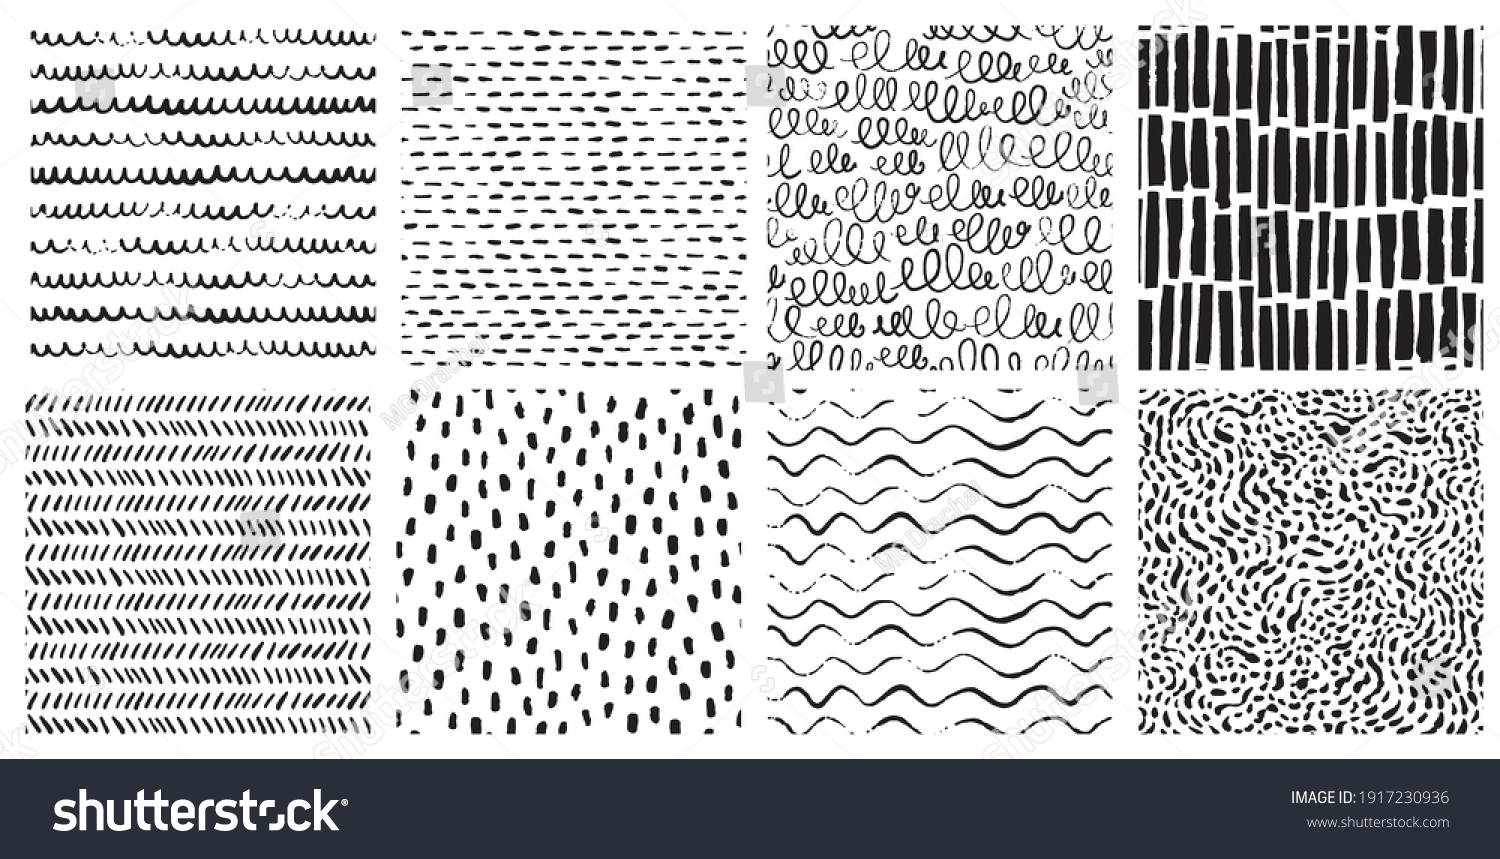 Hand drawn ink pattern and textures set. Expressive seamless abstract vector backgrounds in black and white. Trendy monochrome brush marks. #1917230936